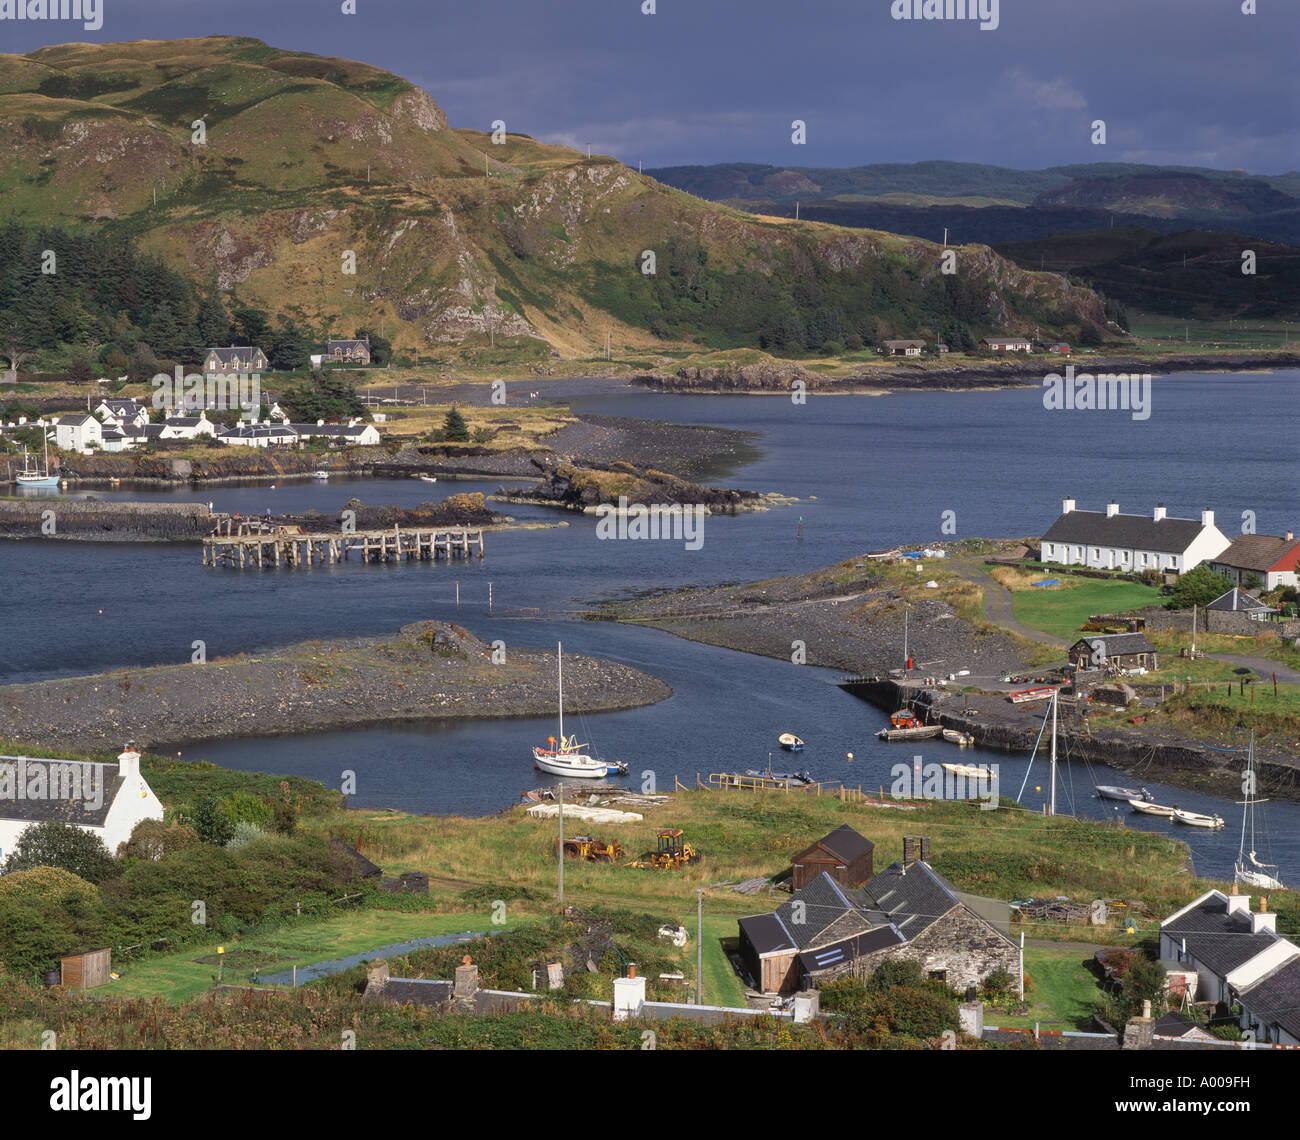 View over Easdale Island to Ellenabeich or Easdale on Seil, Argyll and Bute, Scotland, UK Stock Photo